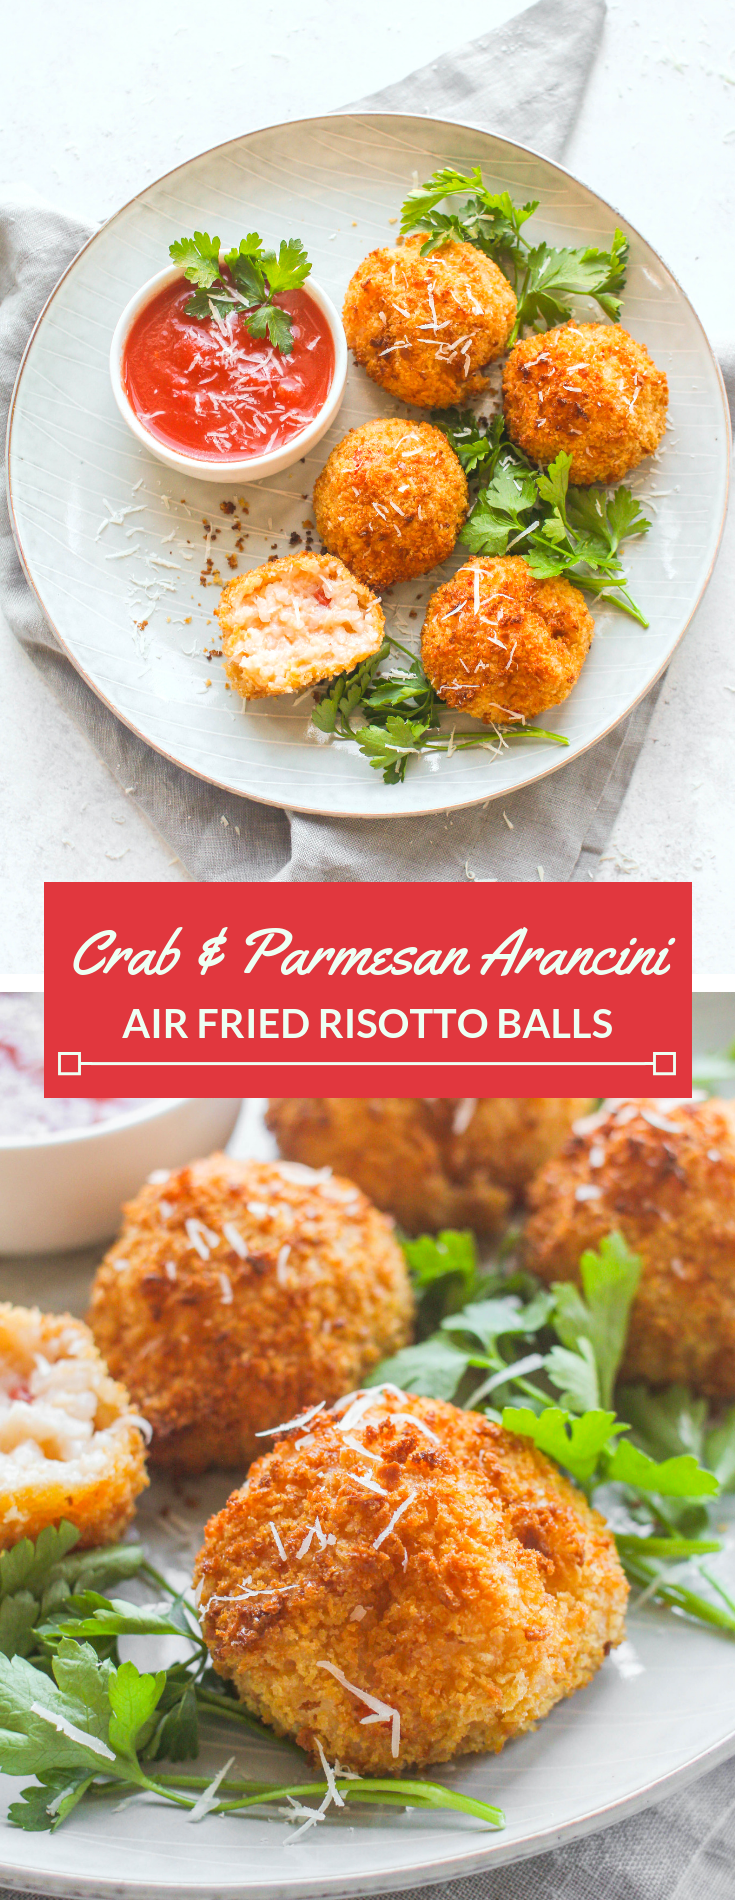 Traditionally made with leftover risotto, Arancini are deep fried risotto balls usually filled with cheese, hearty veggies and/or meat. Today's recipe highlights a creamy crab & parmesan risotto with a panko crust, healthfully fried in an air fryer. 